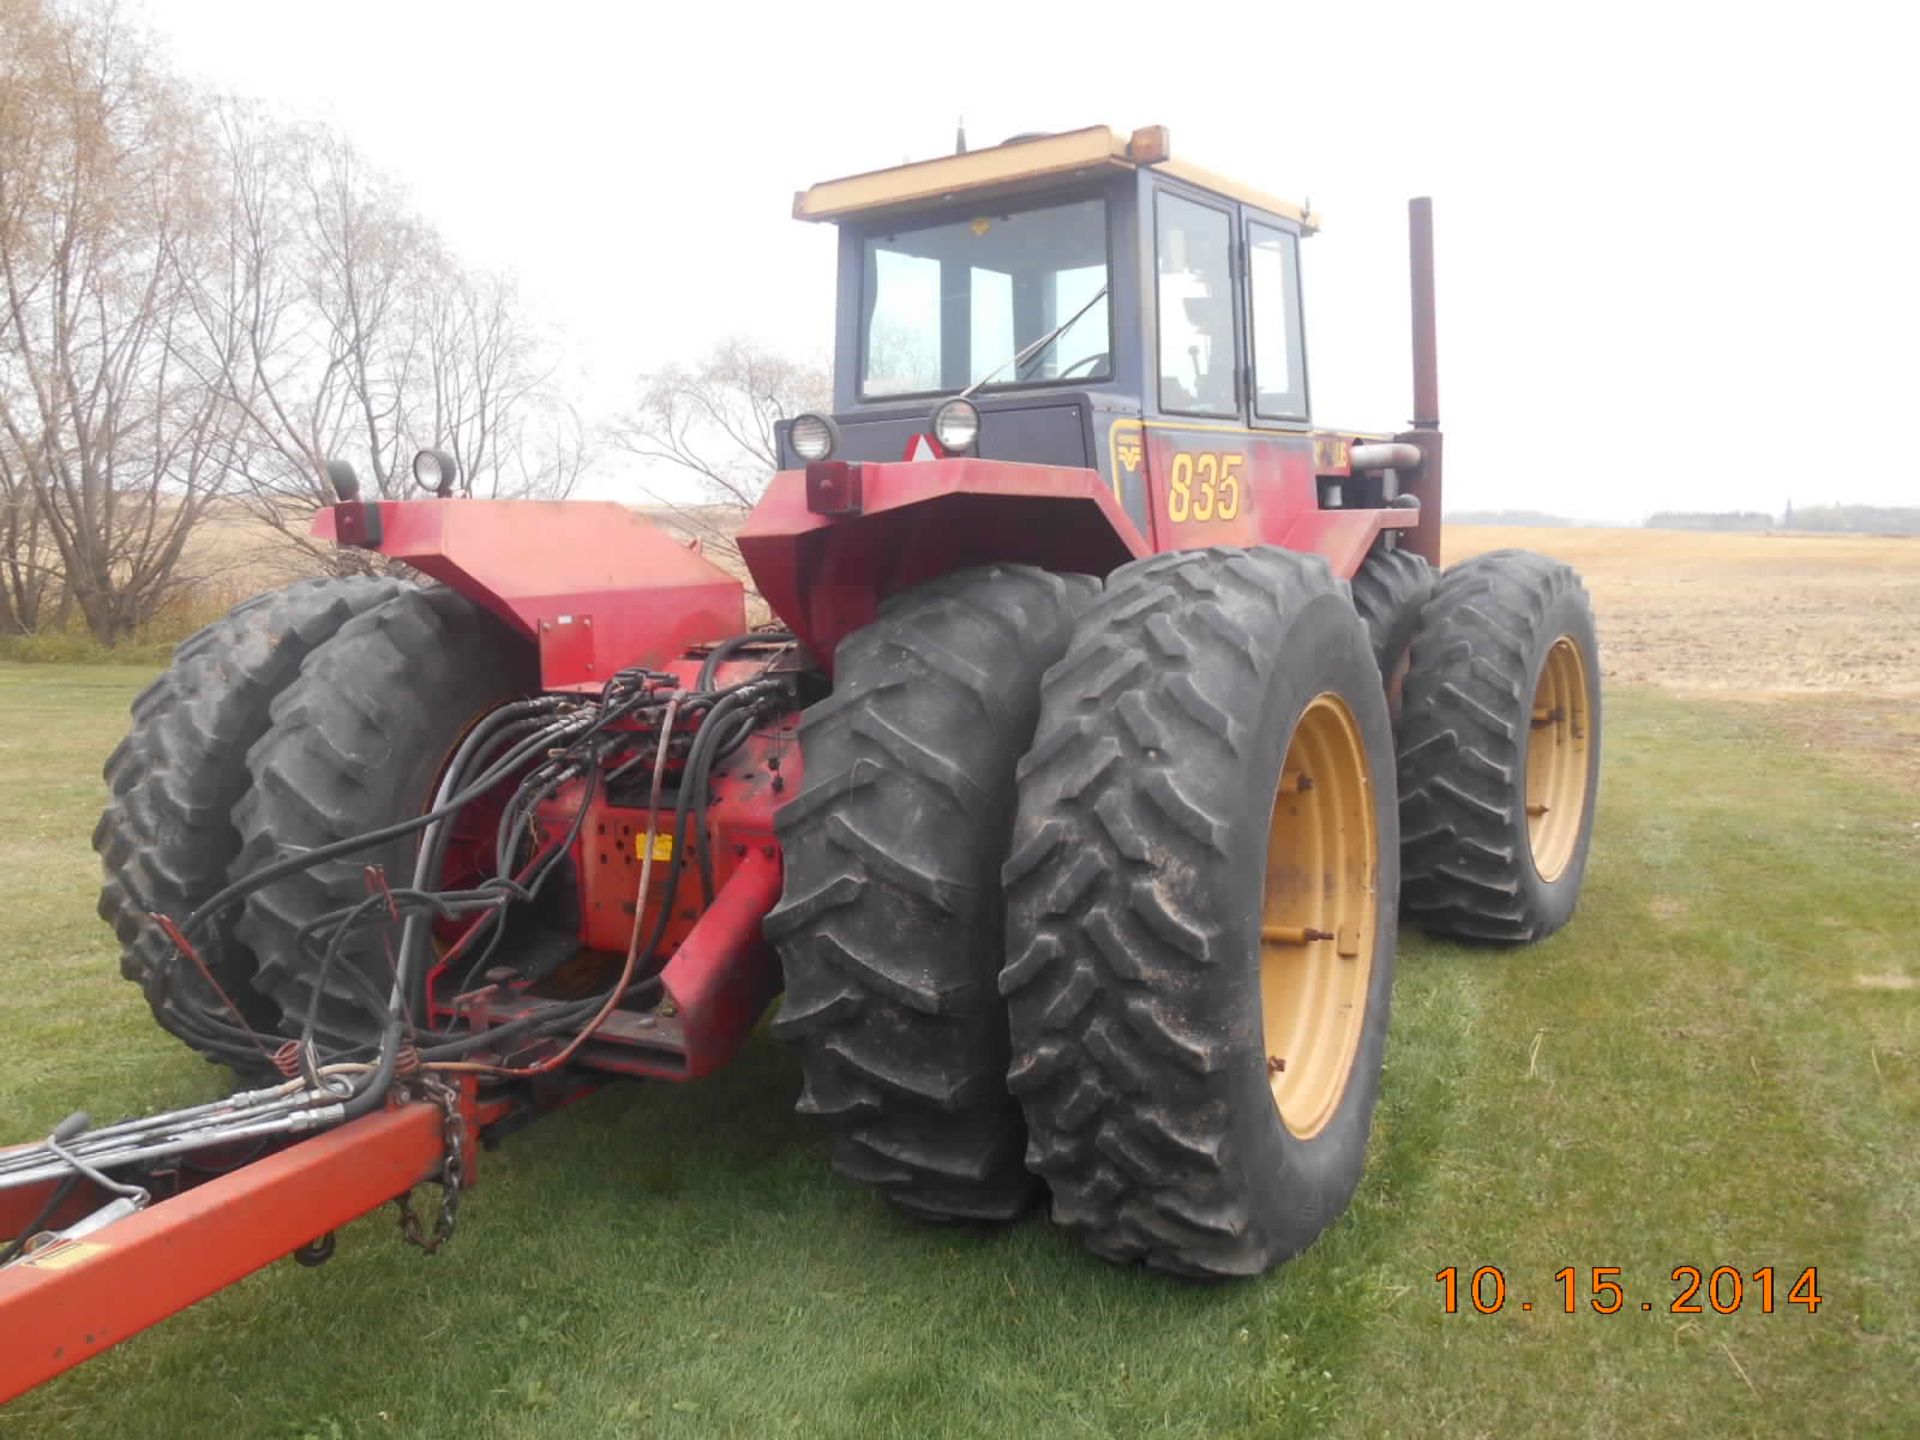 1980 Versatile 835 Tractor: cab, air, 4 hyd, extra air seeder hyd, 18.4x38 tires, recent engine - Image 4 of 4